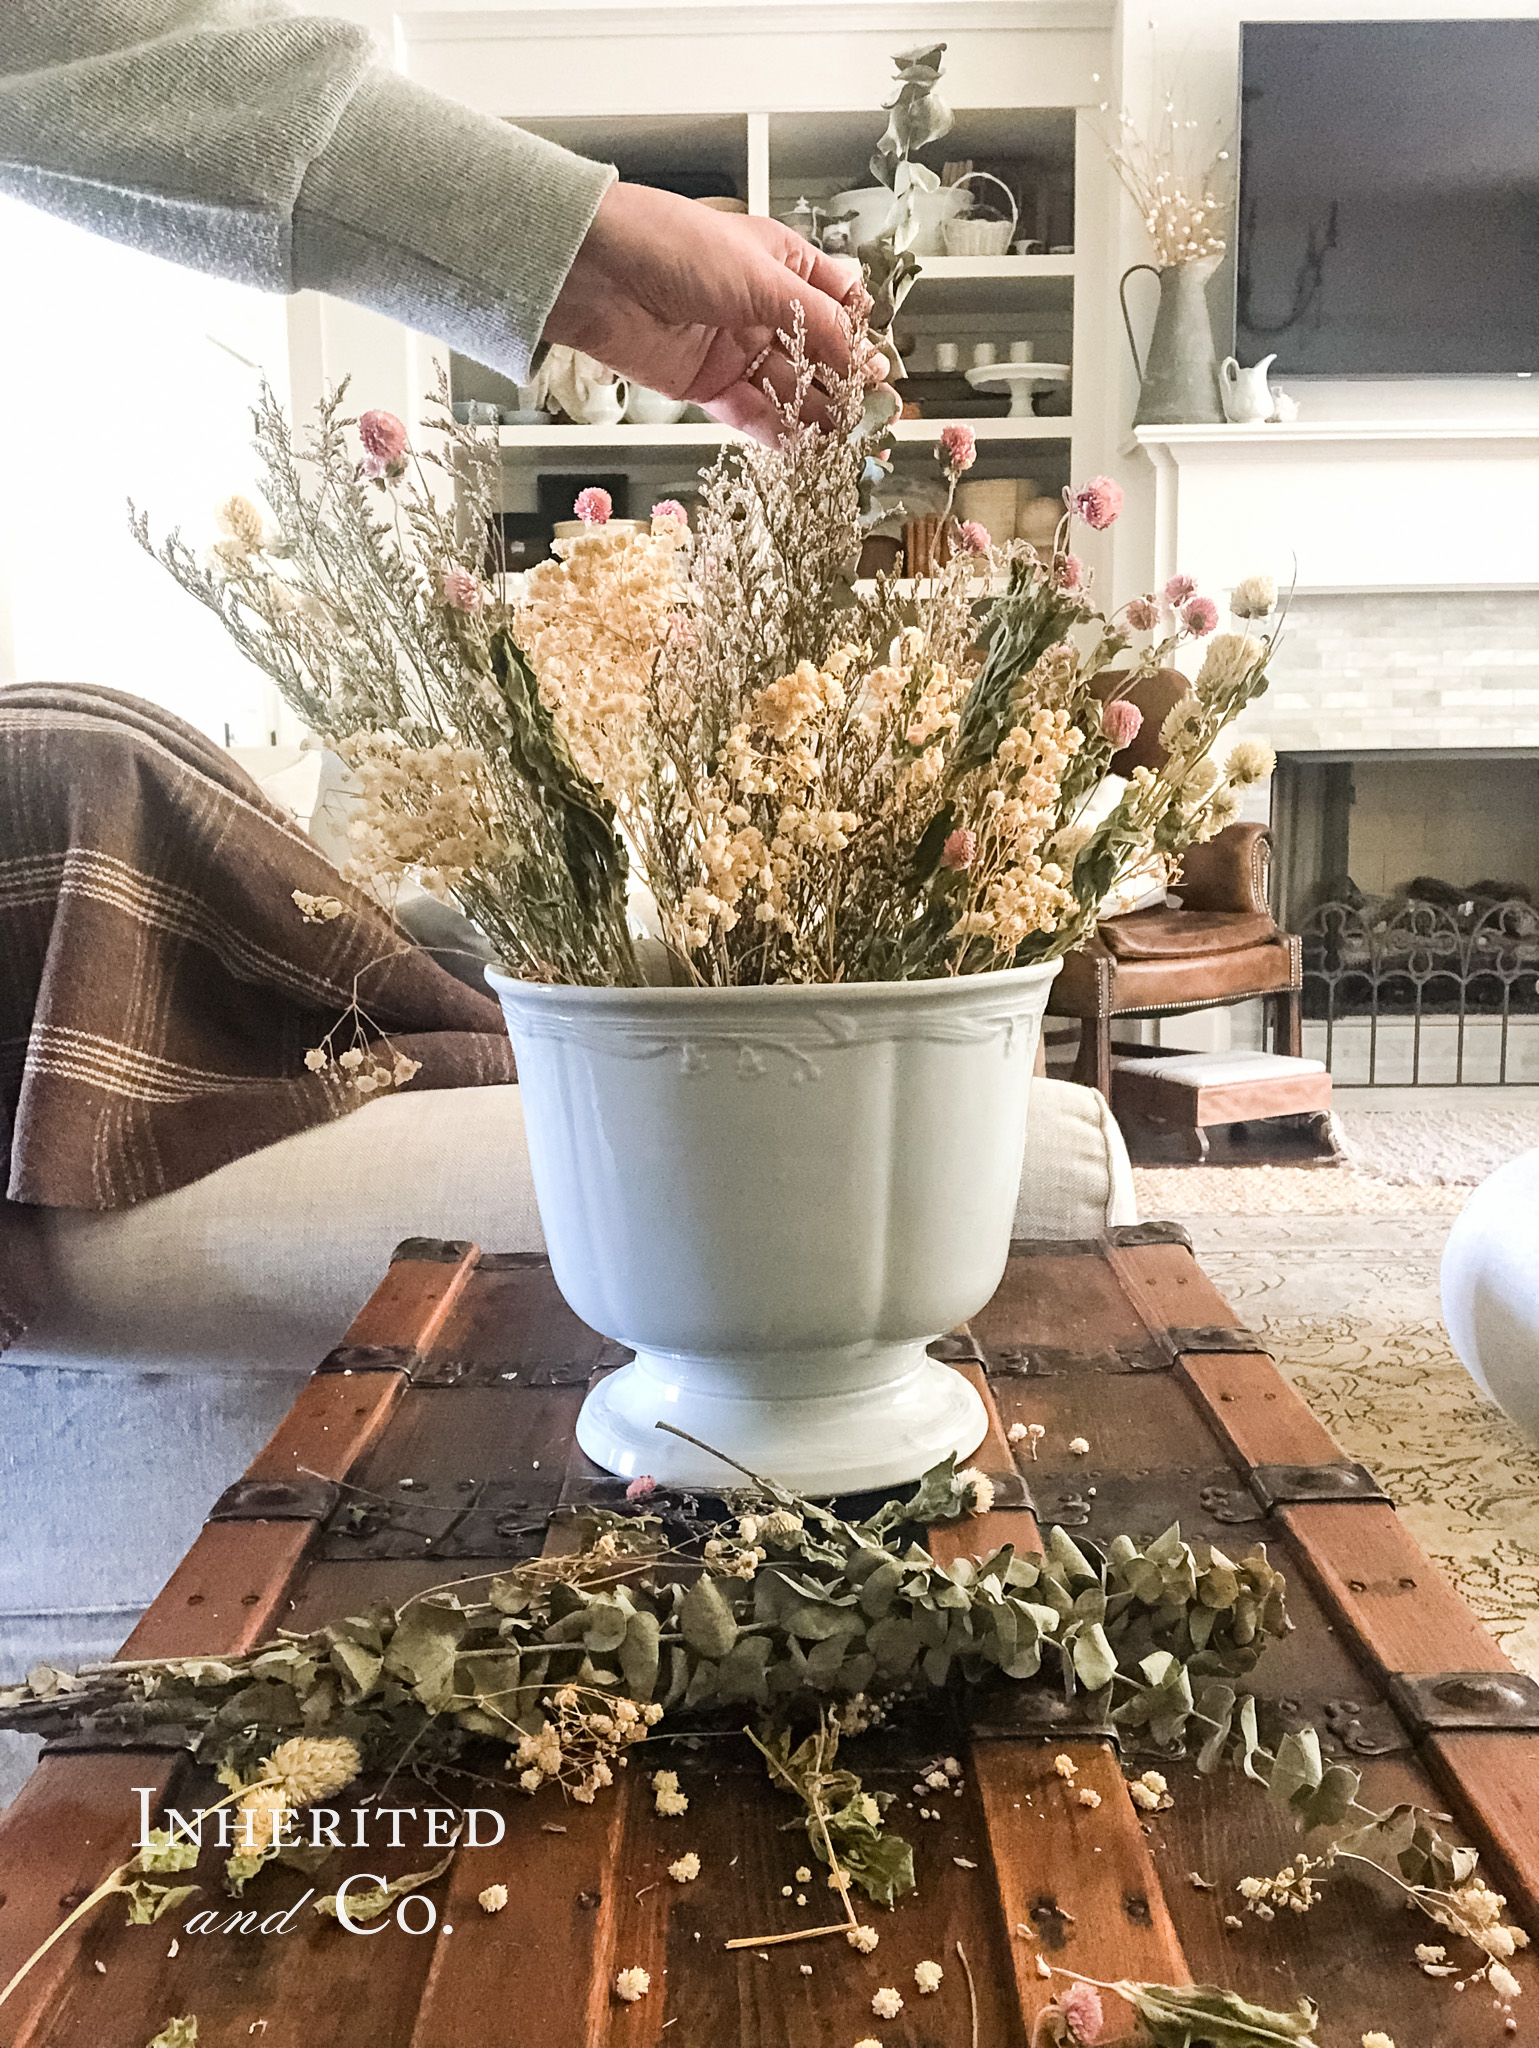 ironstone punch bowl filled with dried flowers sitting atop a steamer trunk with shelves of antiques in the background